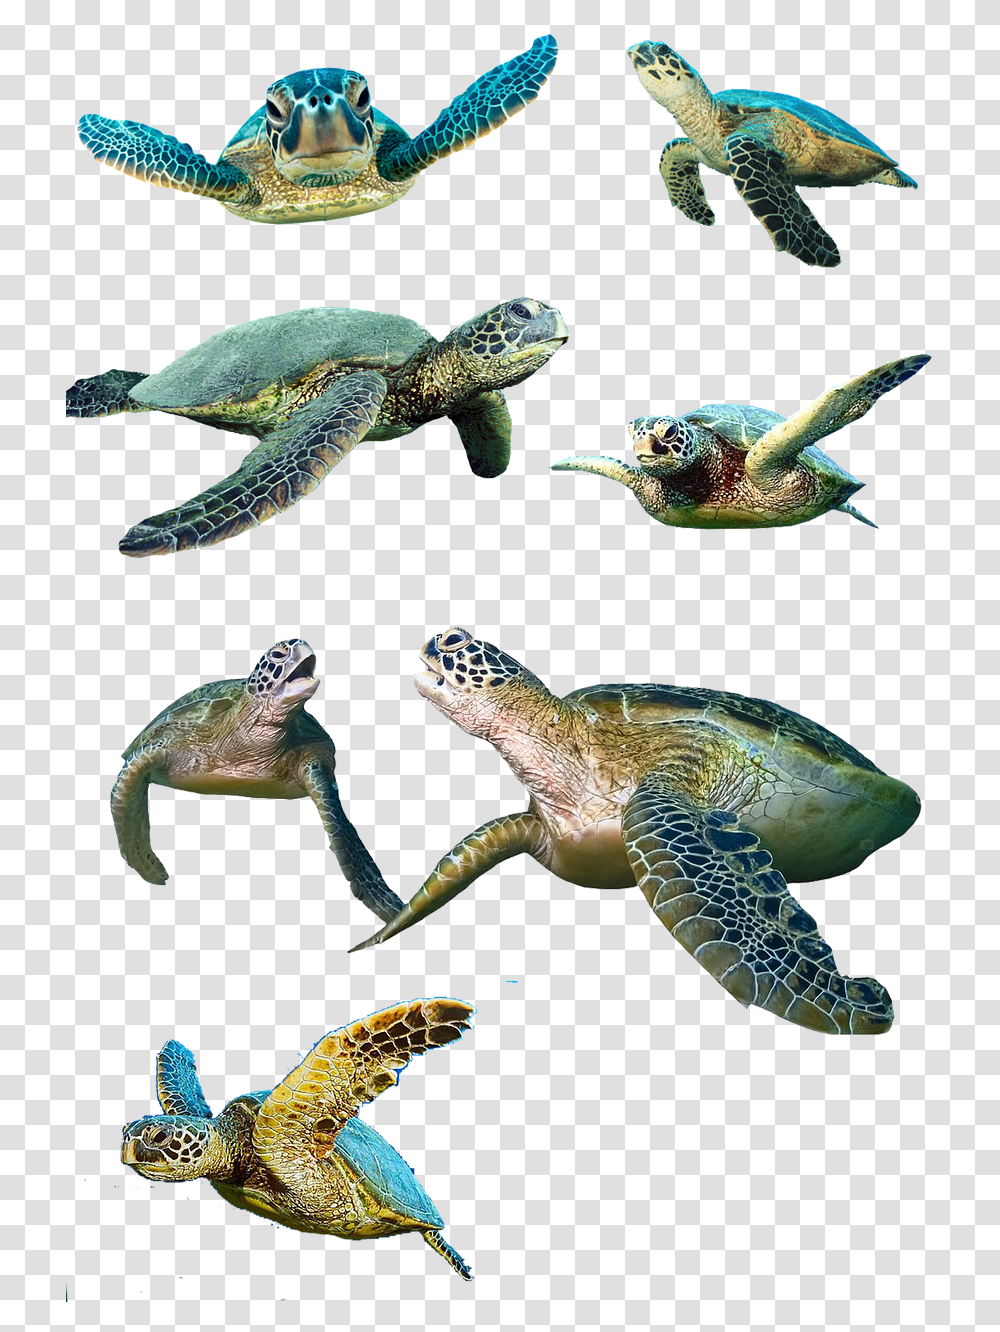 Turtle Isolated Water Turtle Free Photo Baby Sea Turtles Background, Tortoise, Reptile, Sea Life, Animal Transparent Png